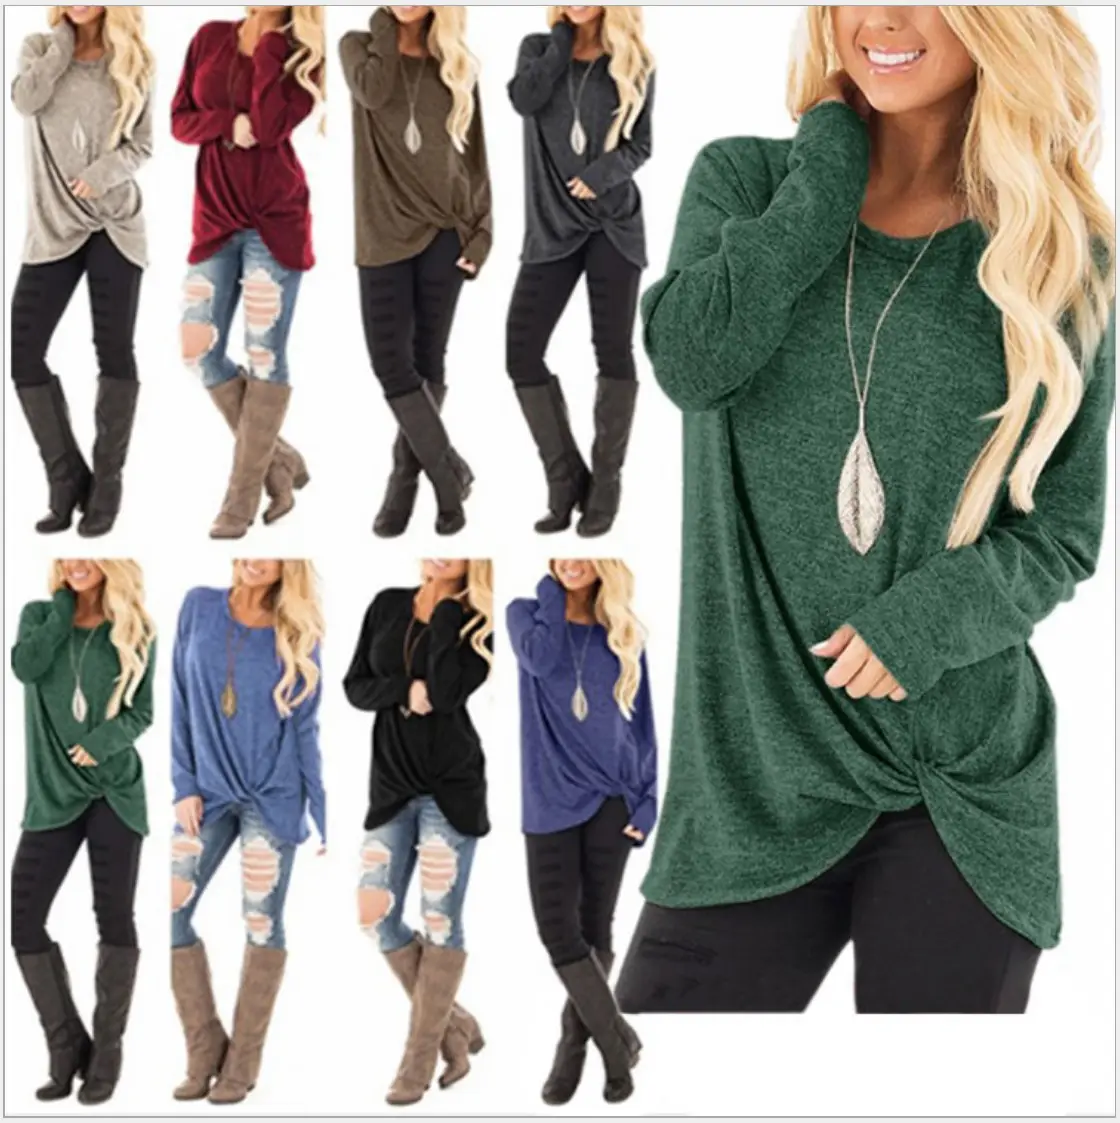 Loose size Tunic Tops for Leggings for Women Long Sleeve V Neck T Shirts Casual Loose Fit